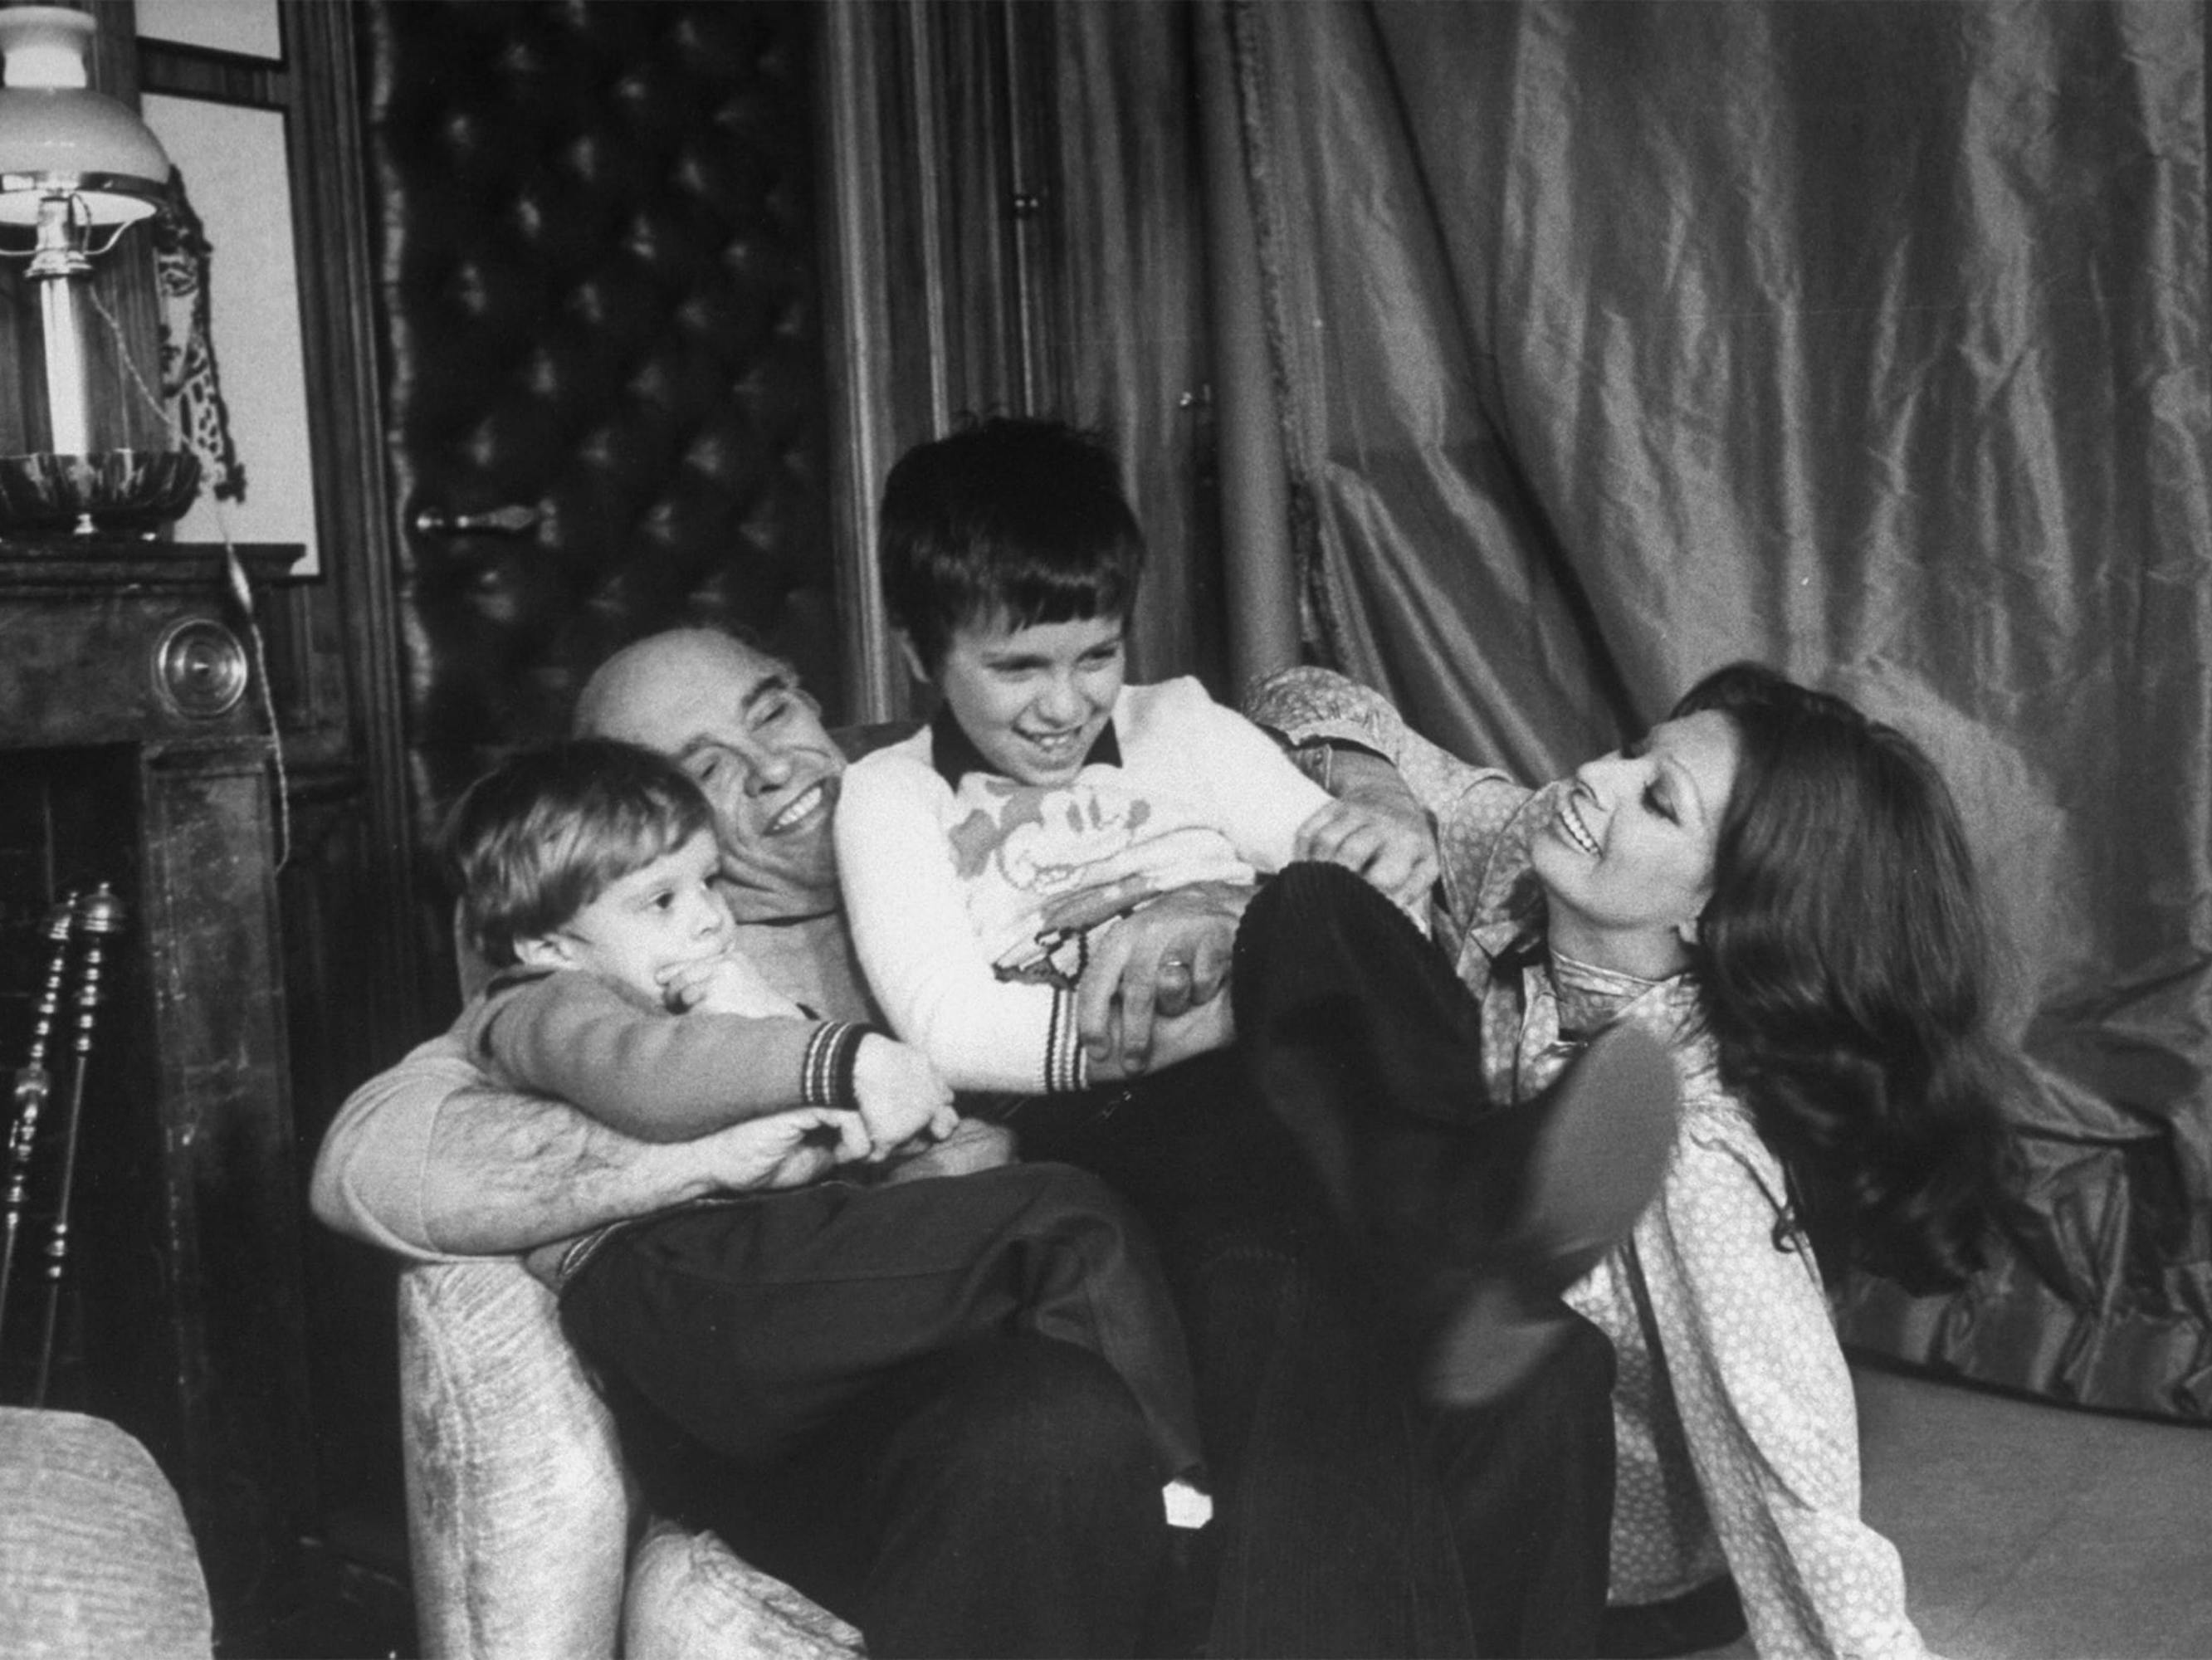 In this playful old photograph, Carlo Ponti sits in an armchair, holding his two young children, while Loren smiles at them from her seat on the floor. 